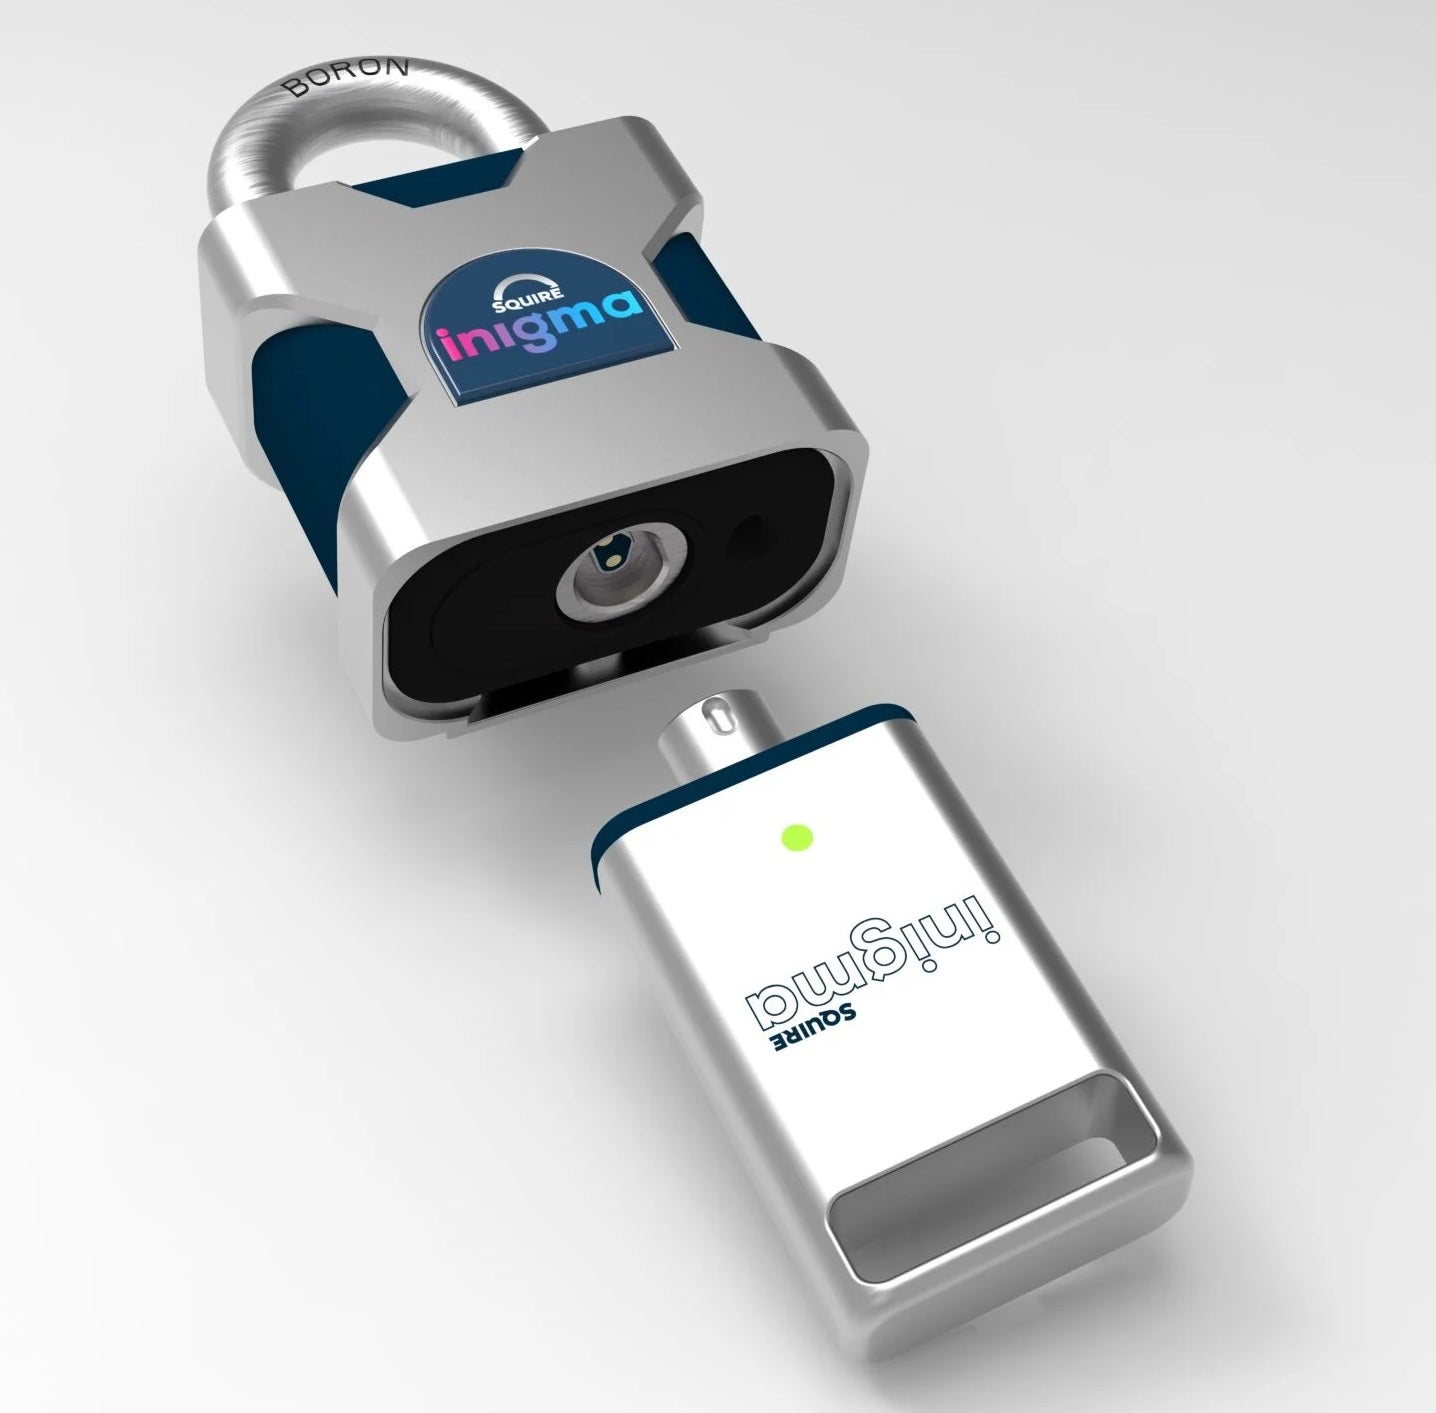 Introducing Inigma: Smart Access Control for Padlocks and Cylinders